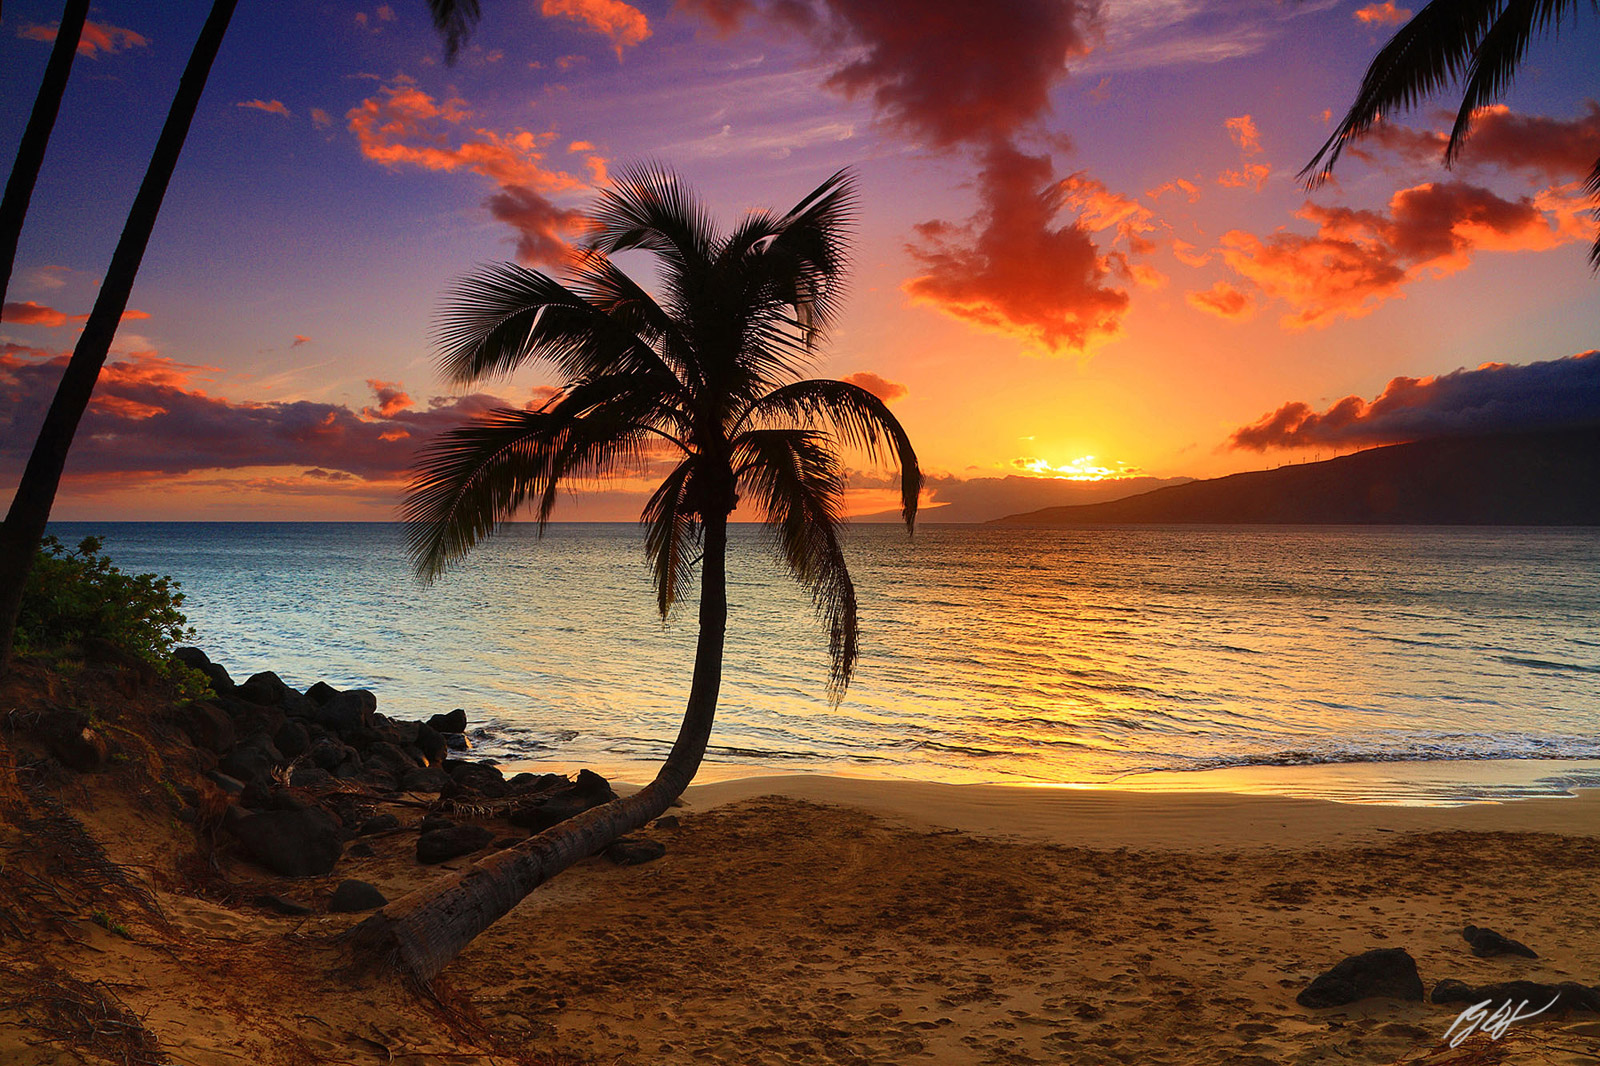 Palm Tee at Sunset from a Beach in Kihei on the Island of Maui in the Hawaiian Islands